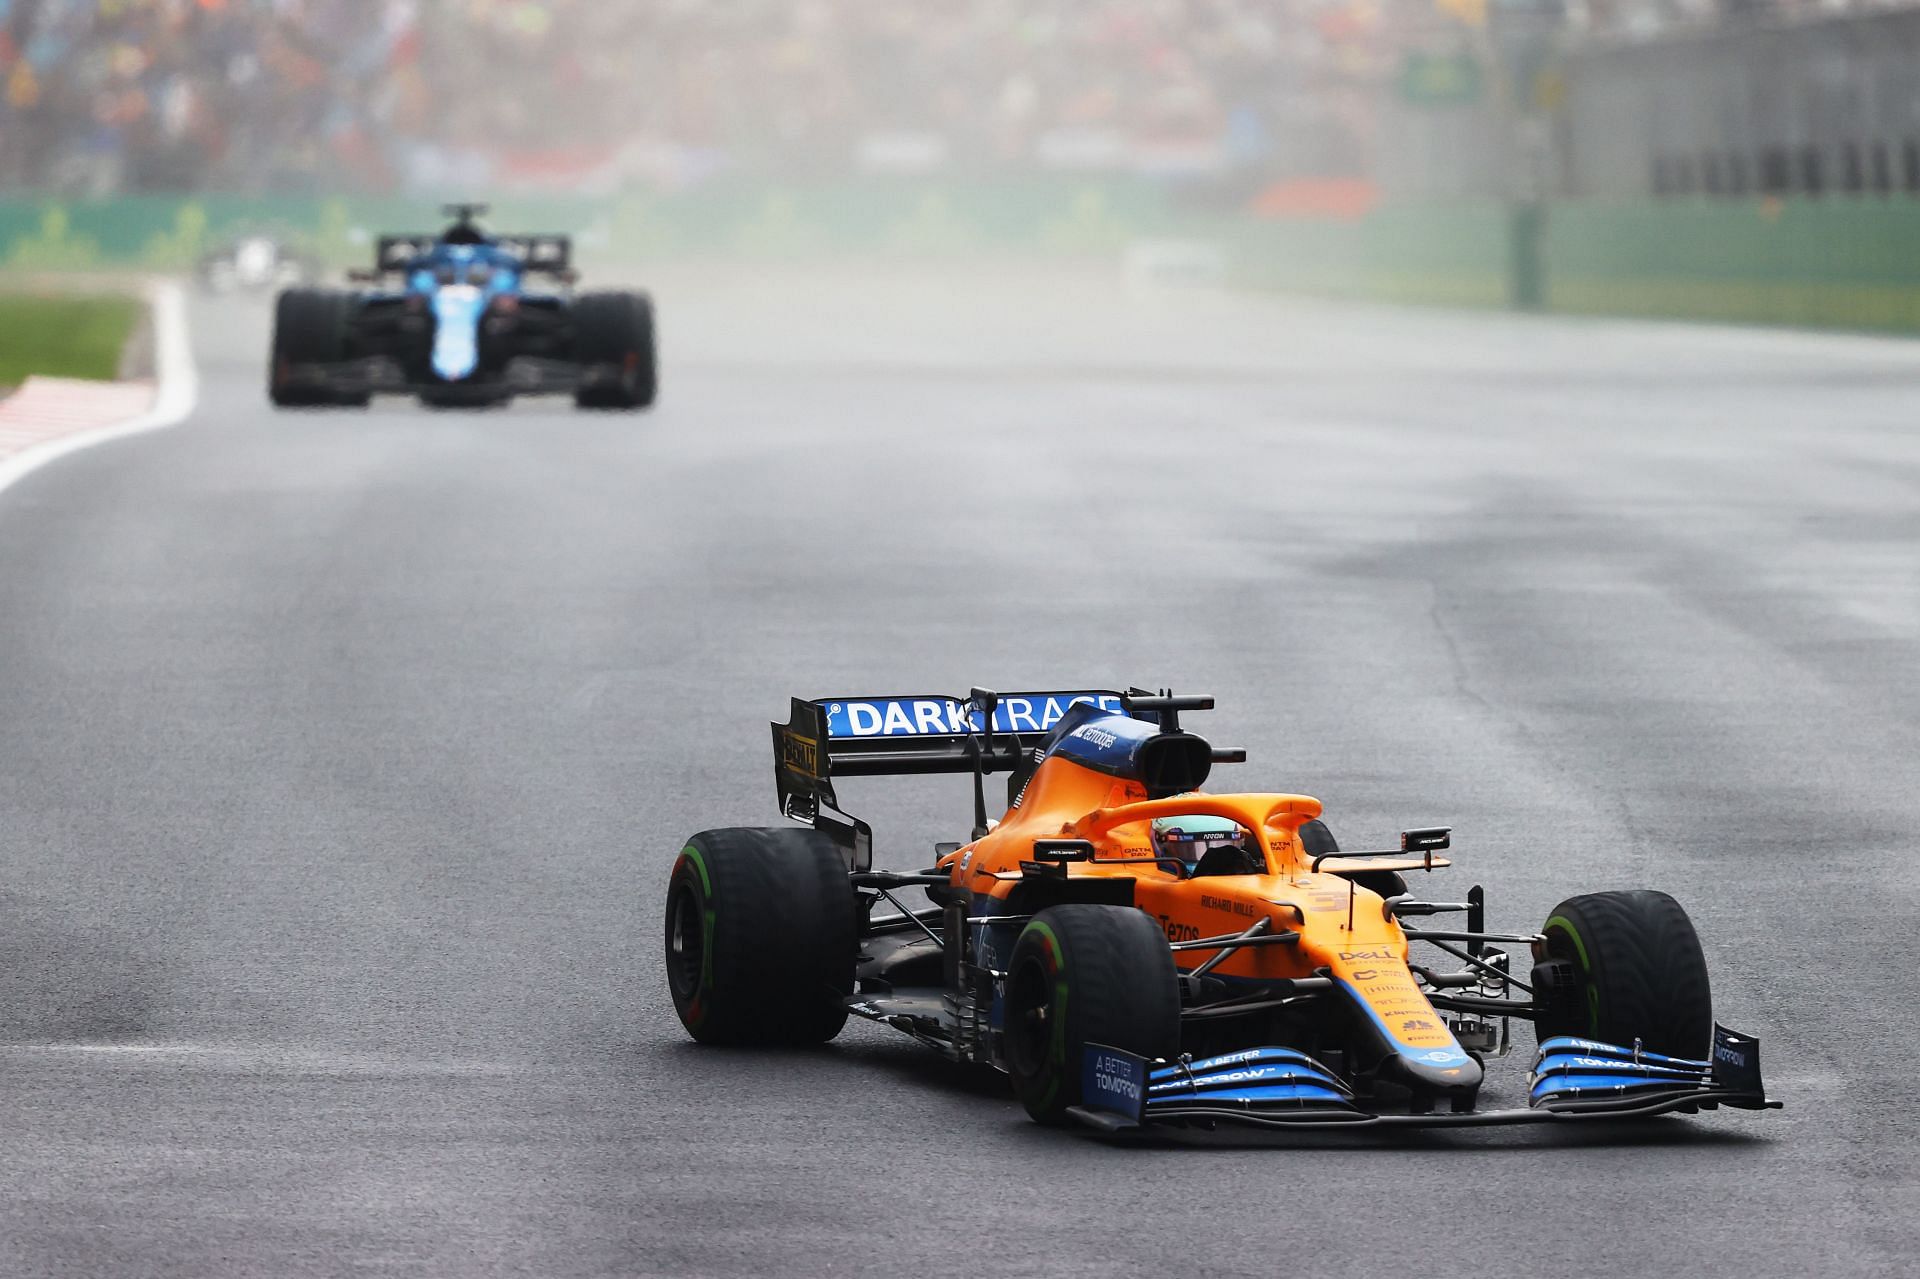 Daniel Ricciardo in action for McLaren at the 2021 Turkish Grand Prix (Photo by Bryn Lennon/Getty Images)